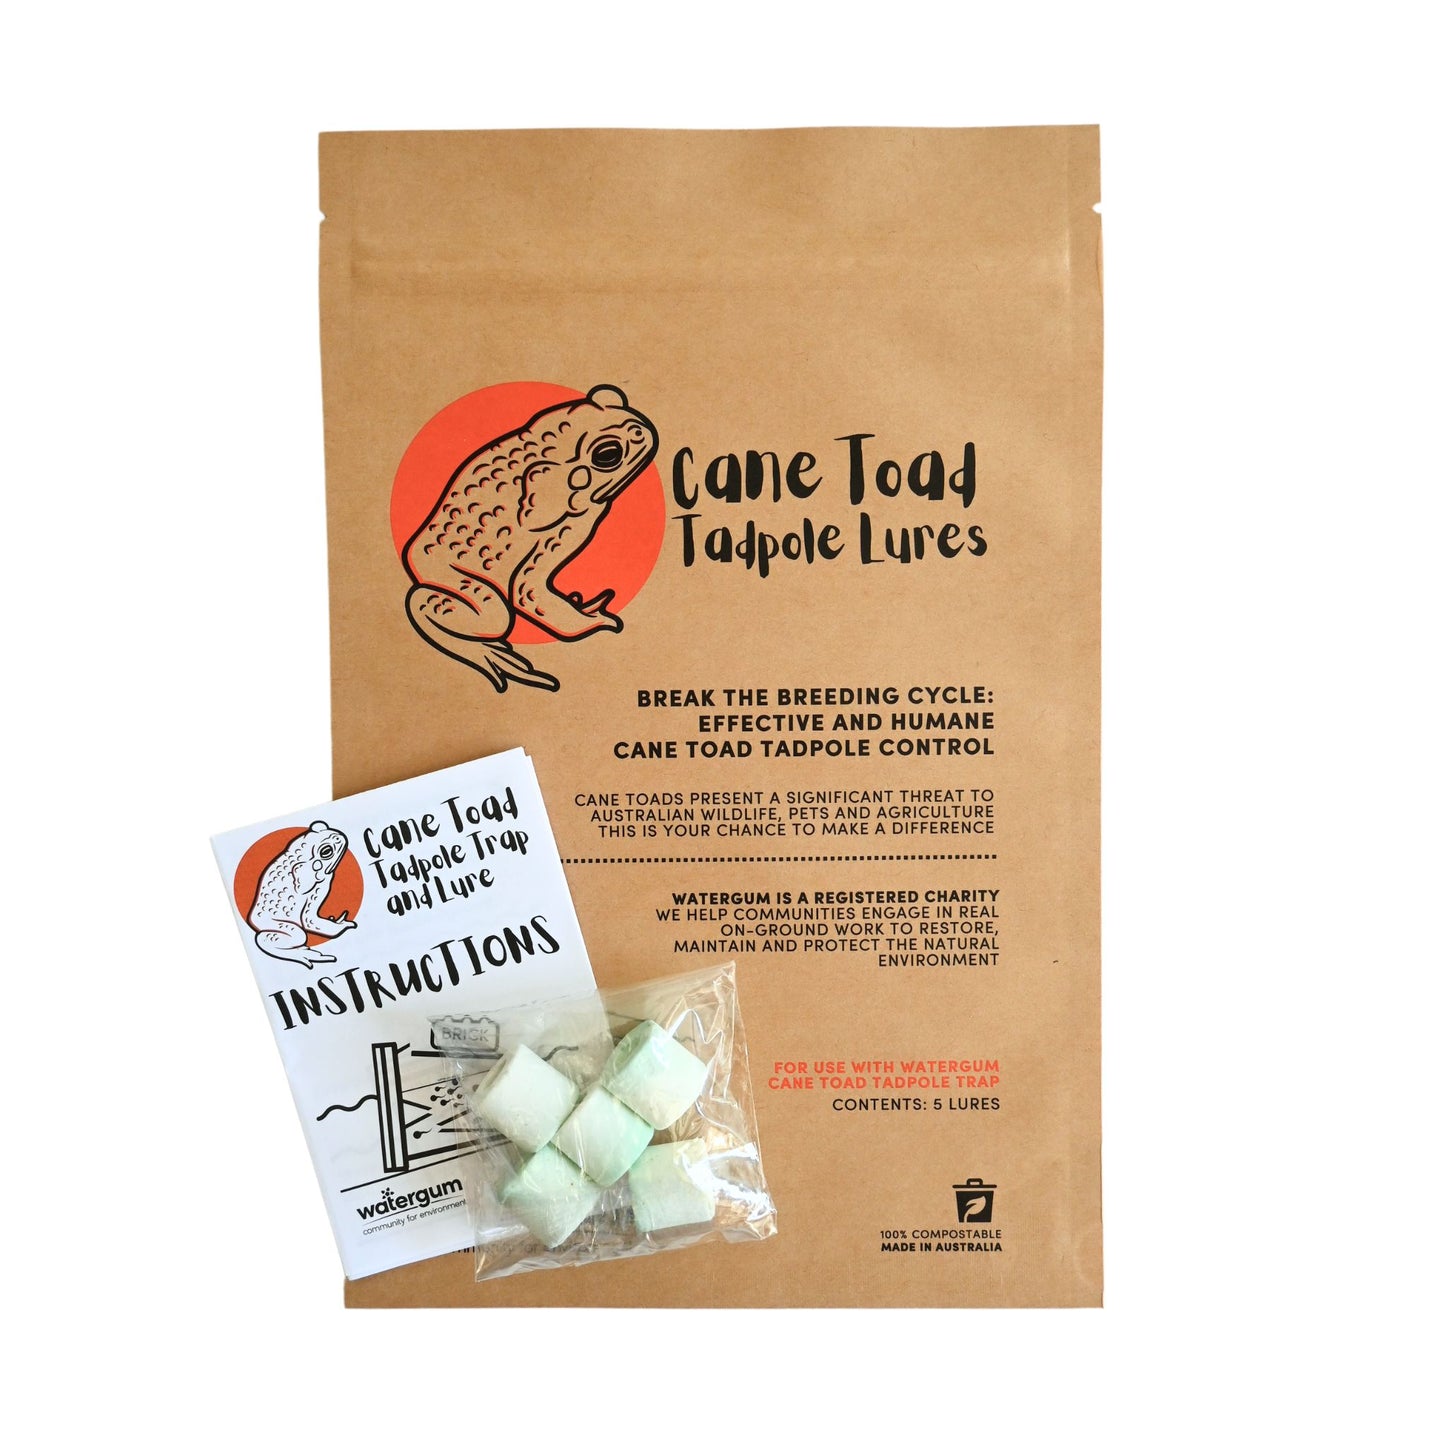 Cane Toad Tadpole Trap and Lure Package